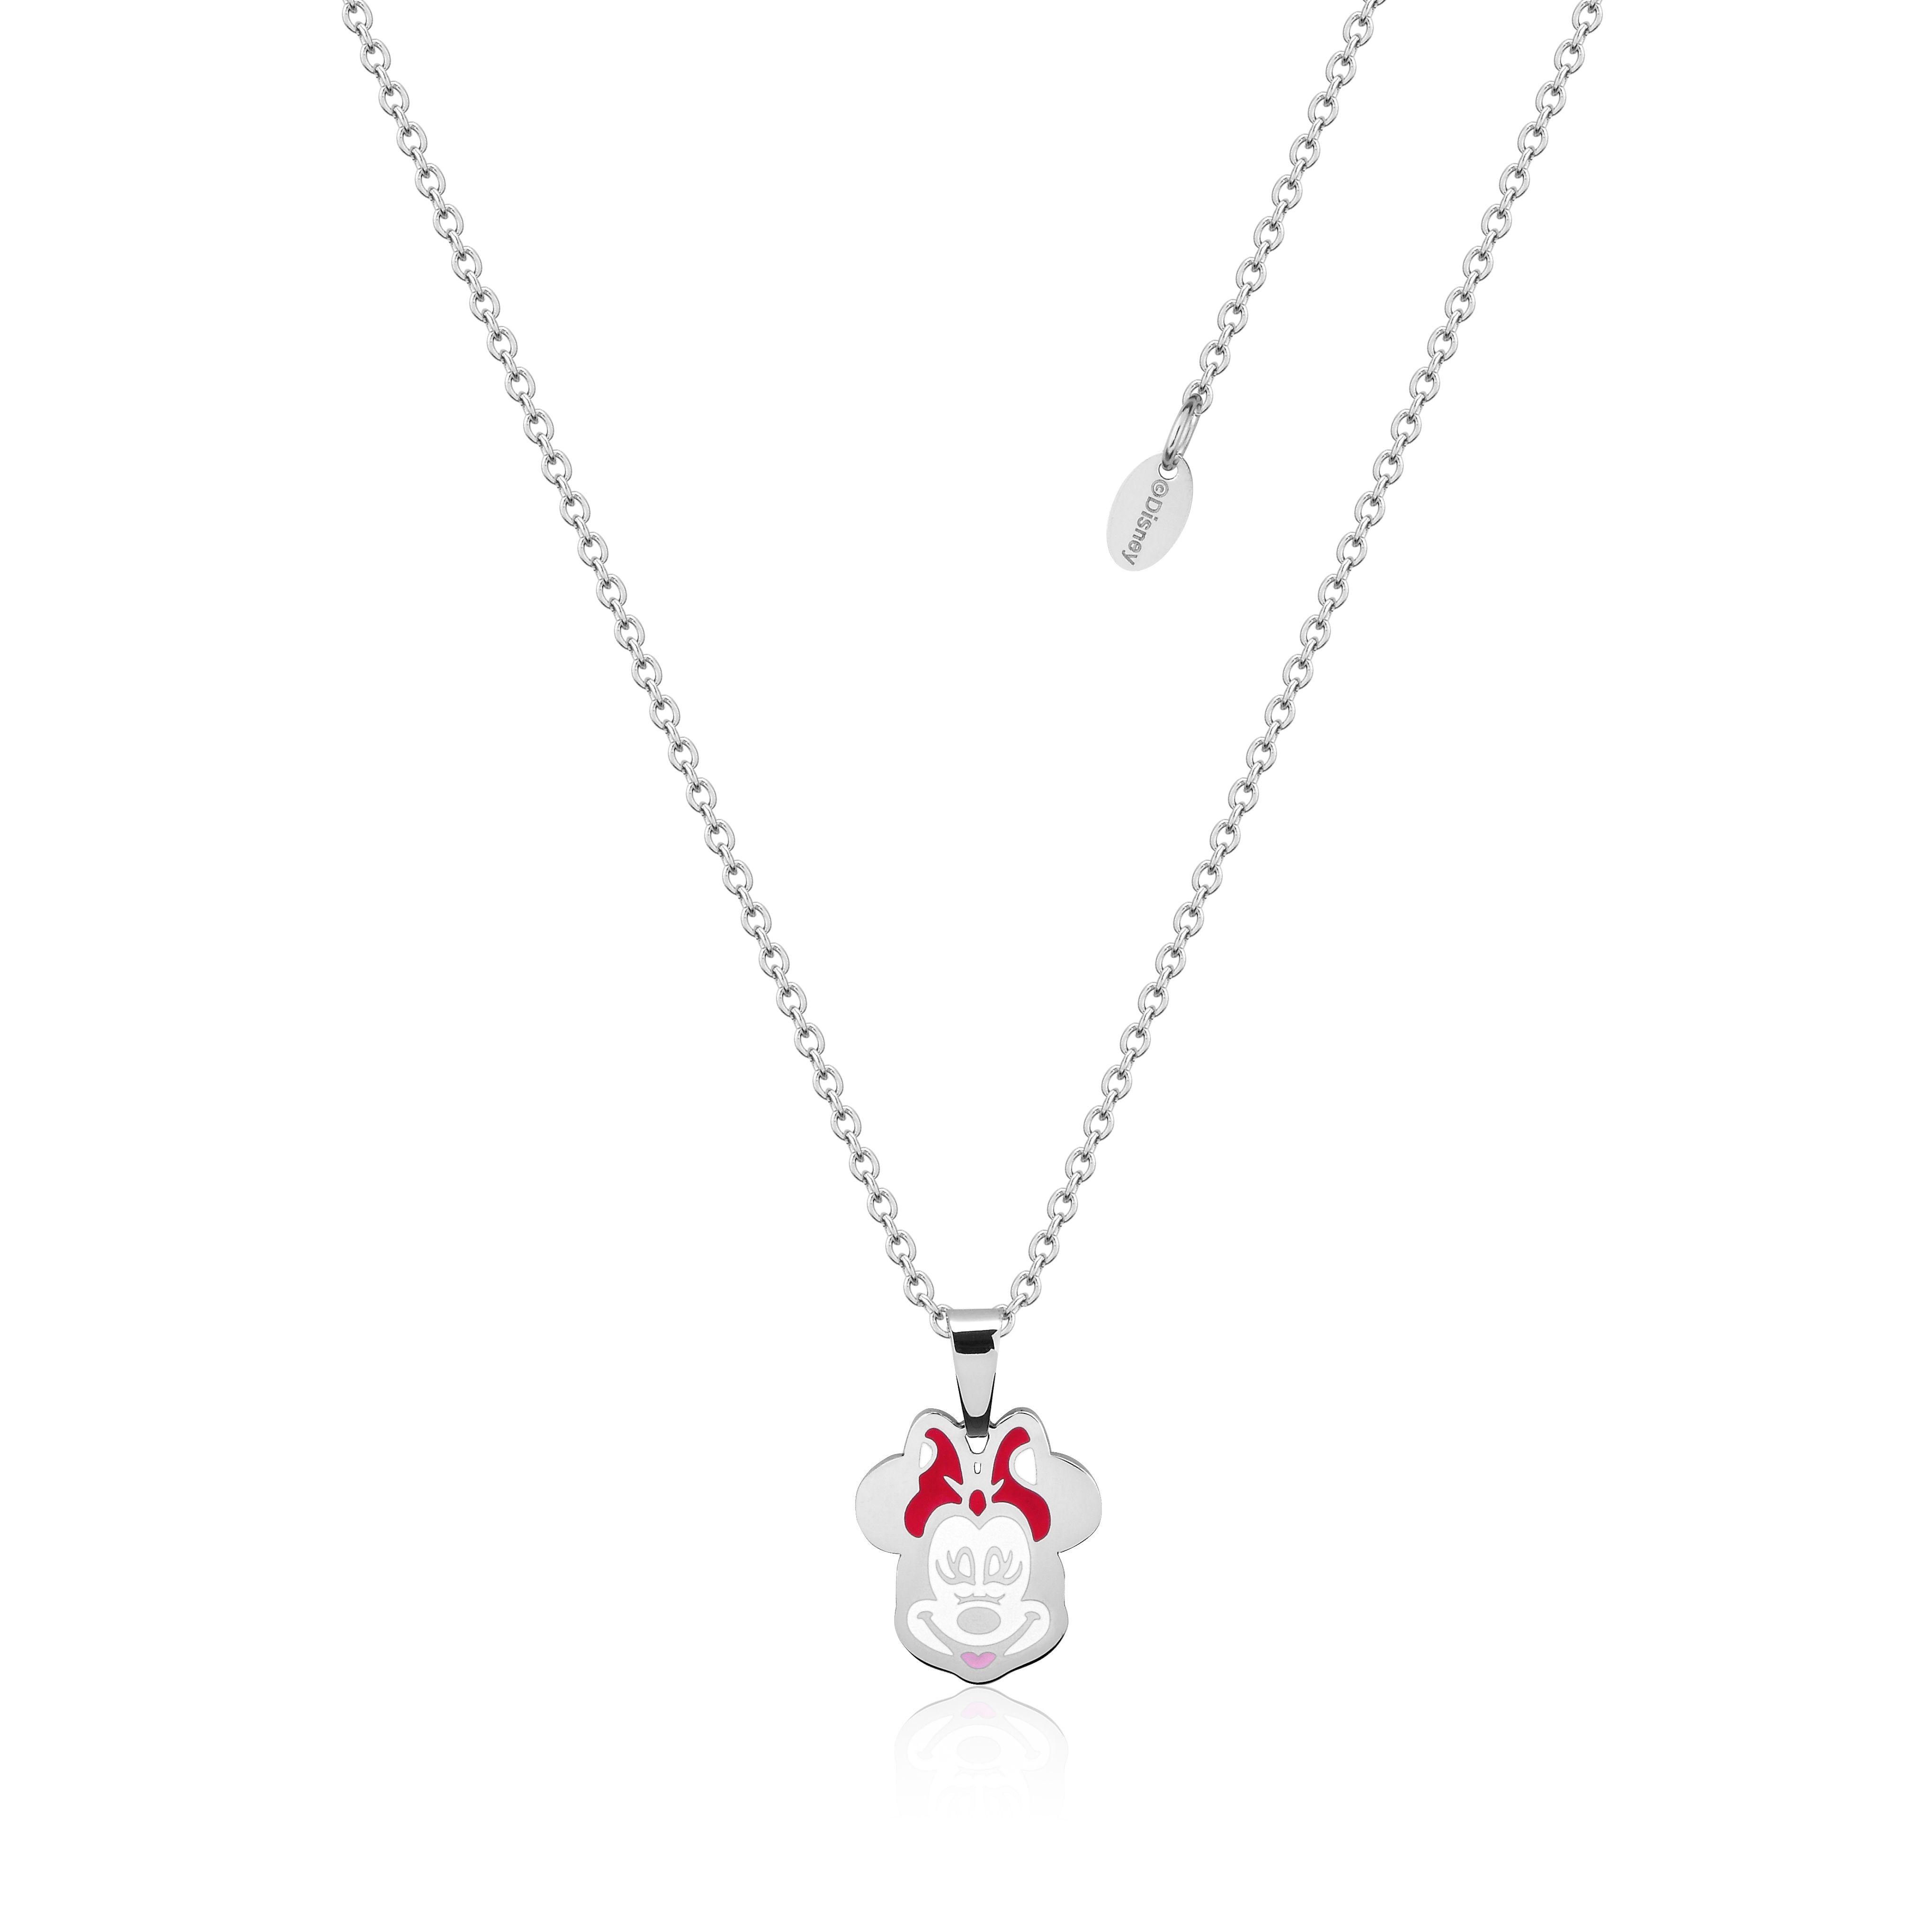 DISNEY Stainless Steel 47cm Animated Minnie Mouse Pendant on Chain